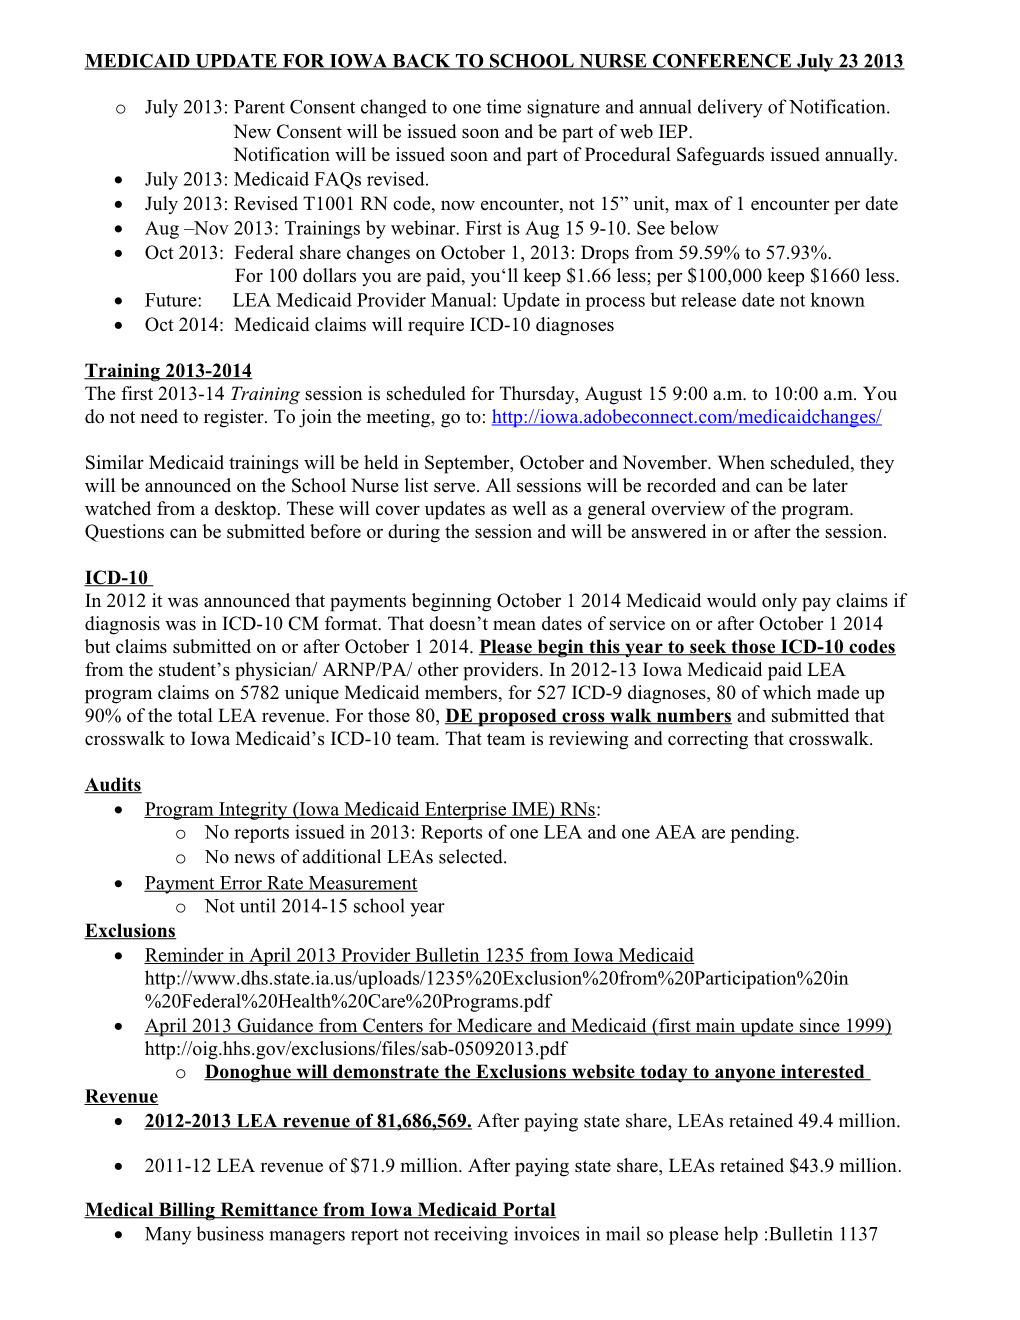 Medicaid Update for Iasb Uen Health Services Group 12/3/2008